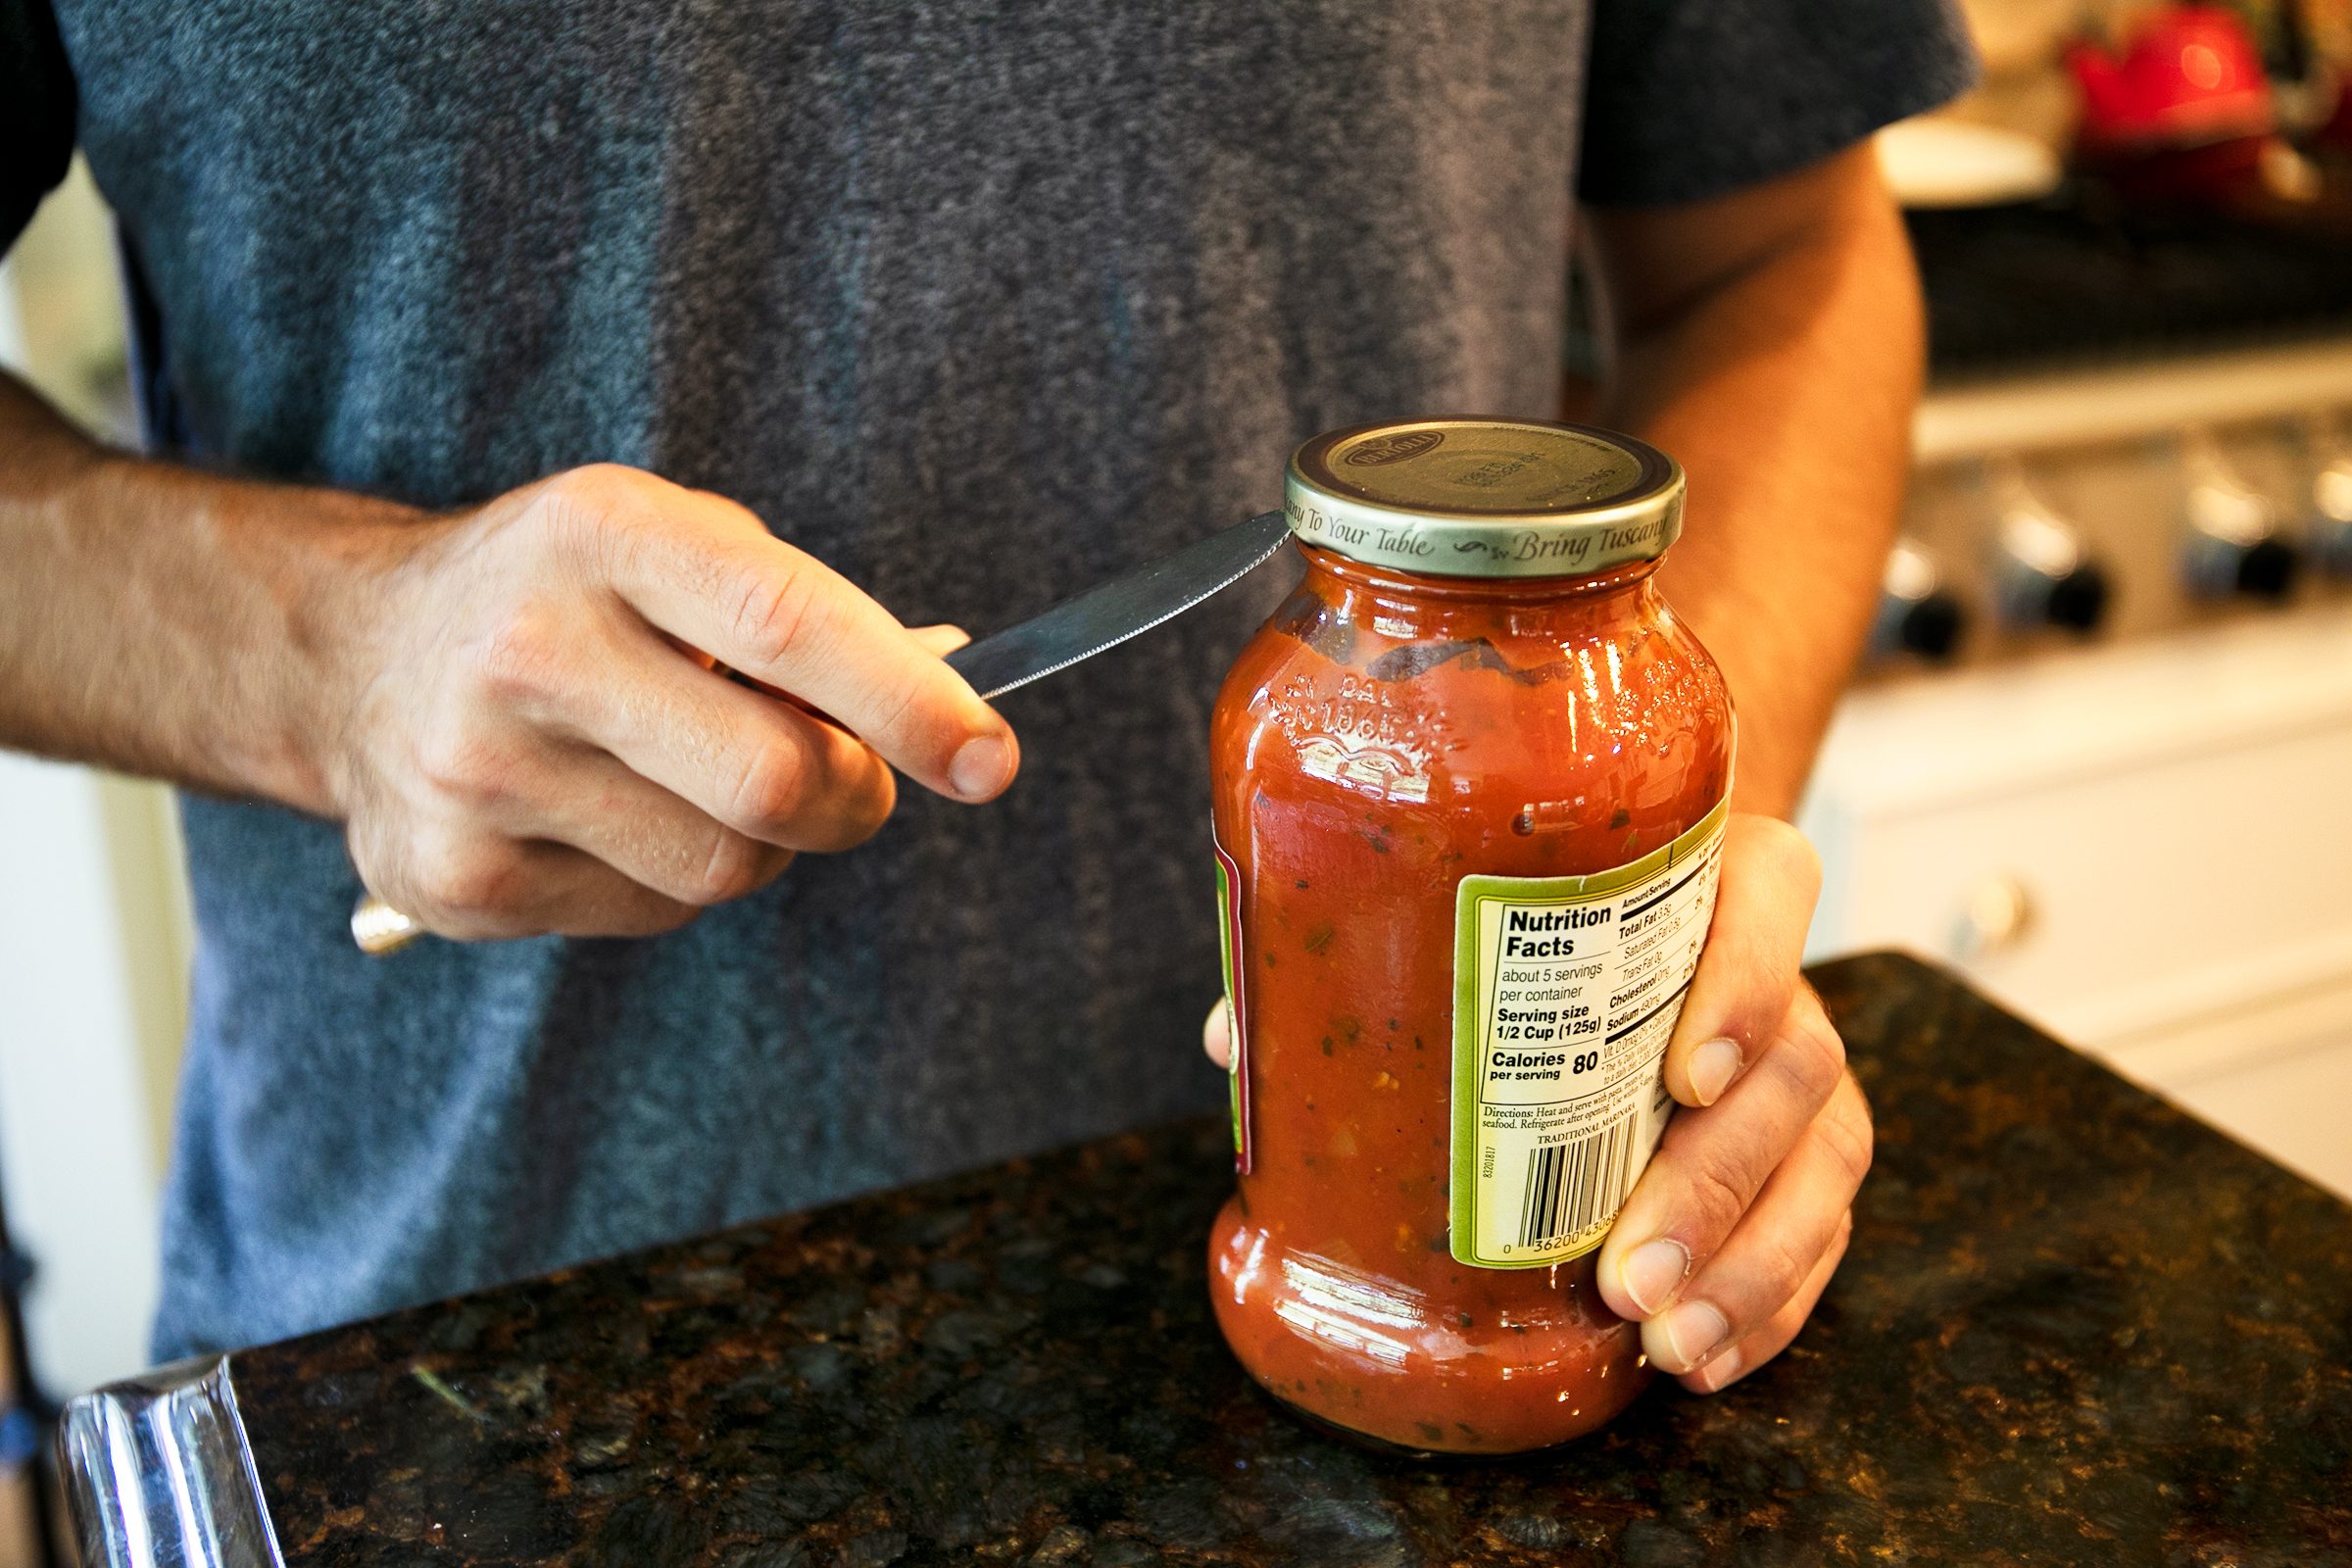 How to Open a Jar: 6 Tricks for Prying Open Even the Most Stubborn Lids